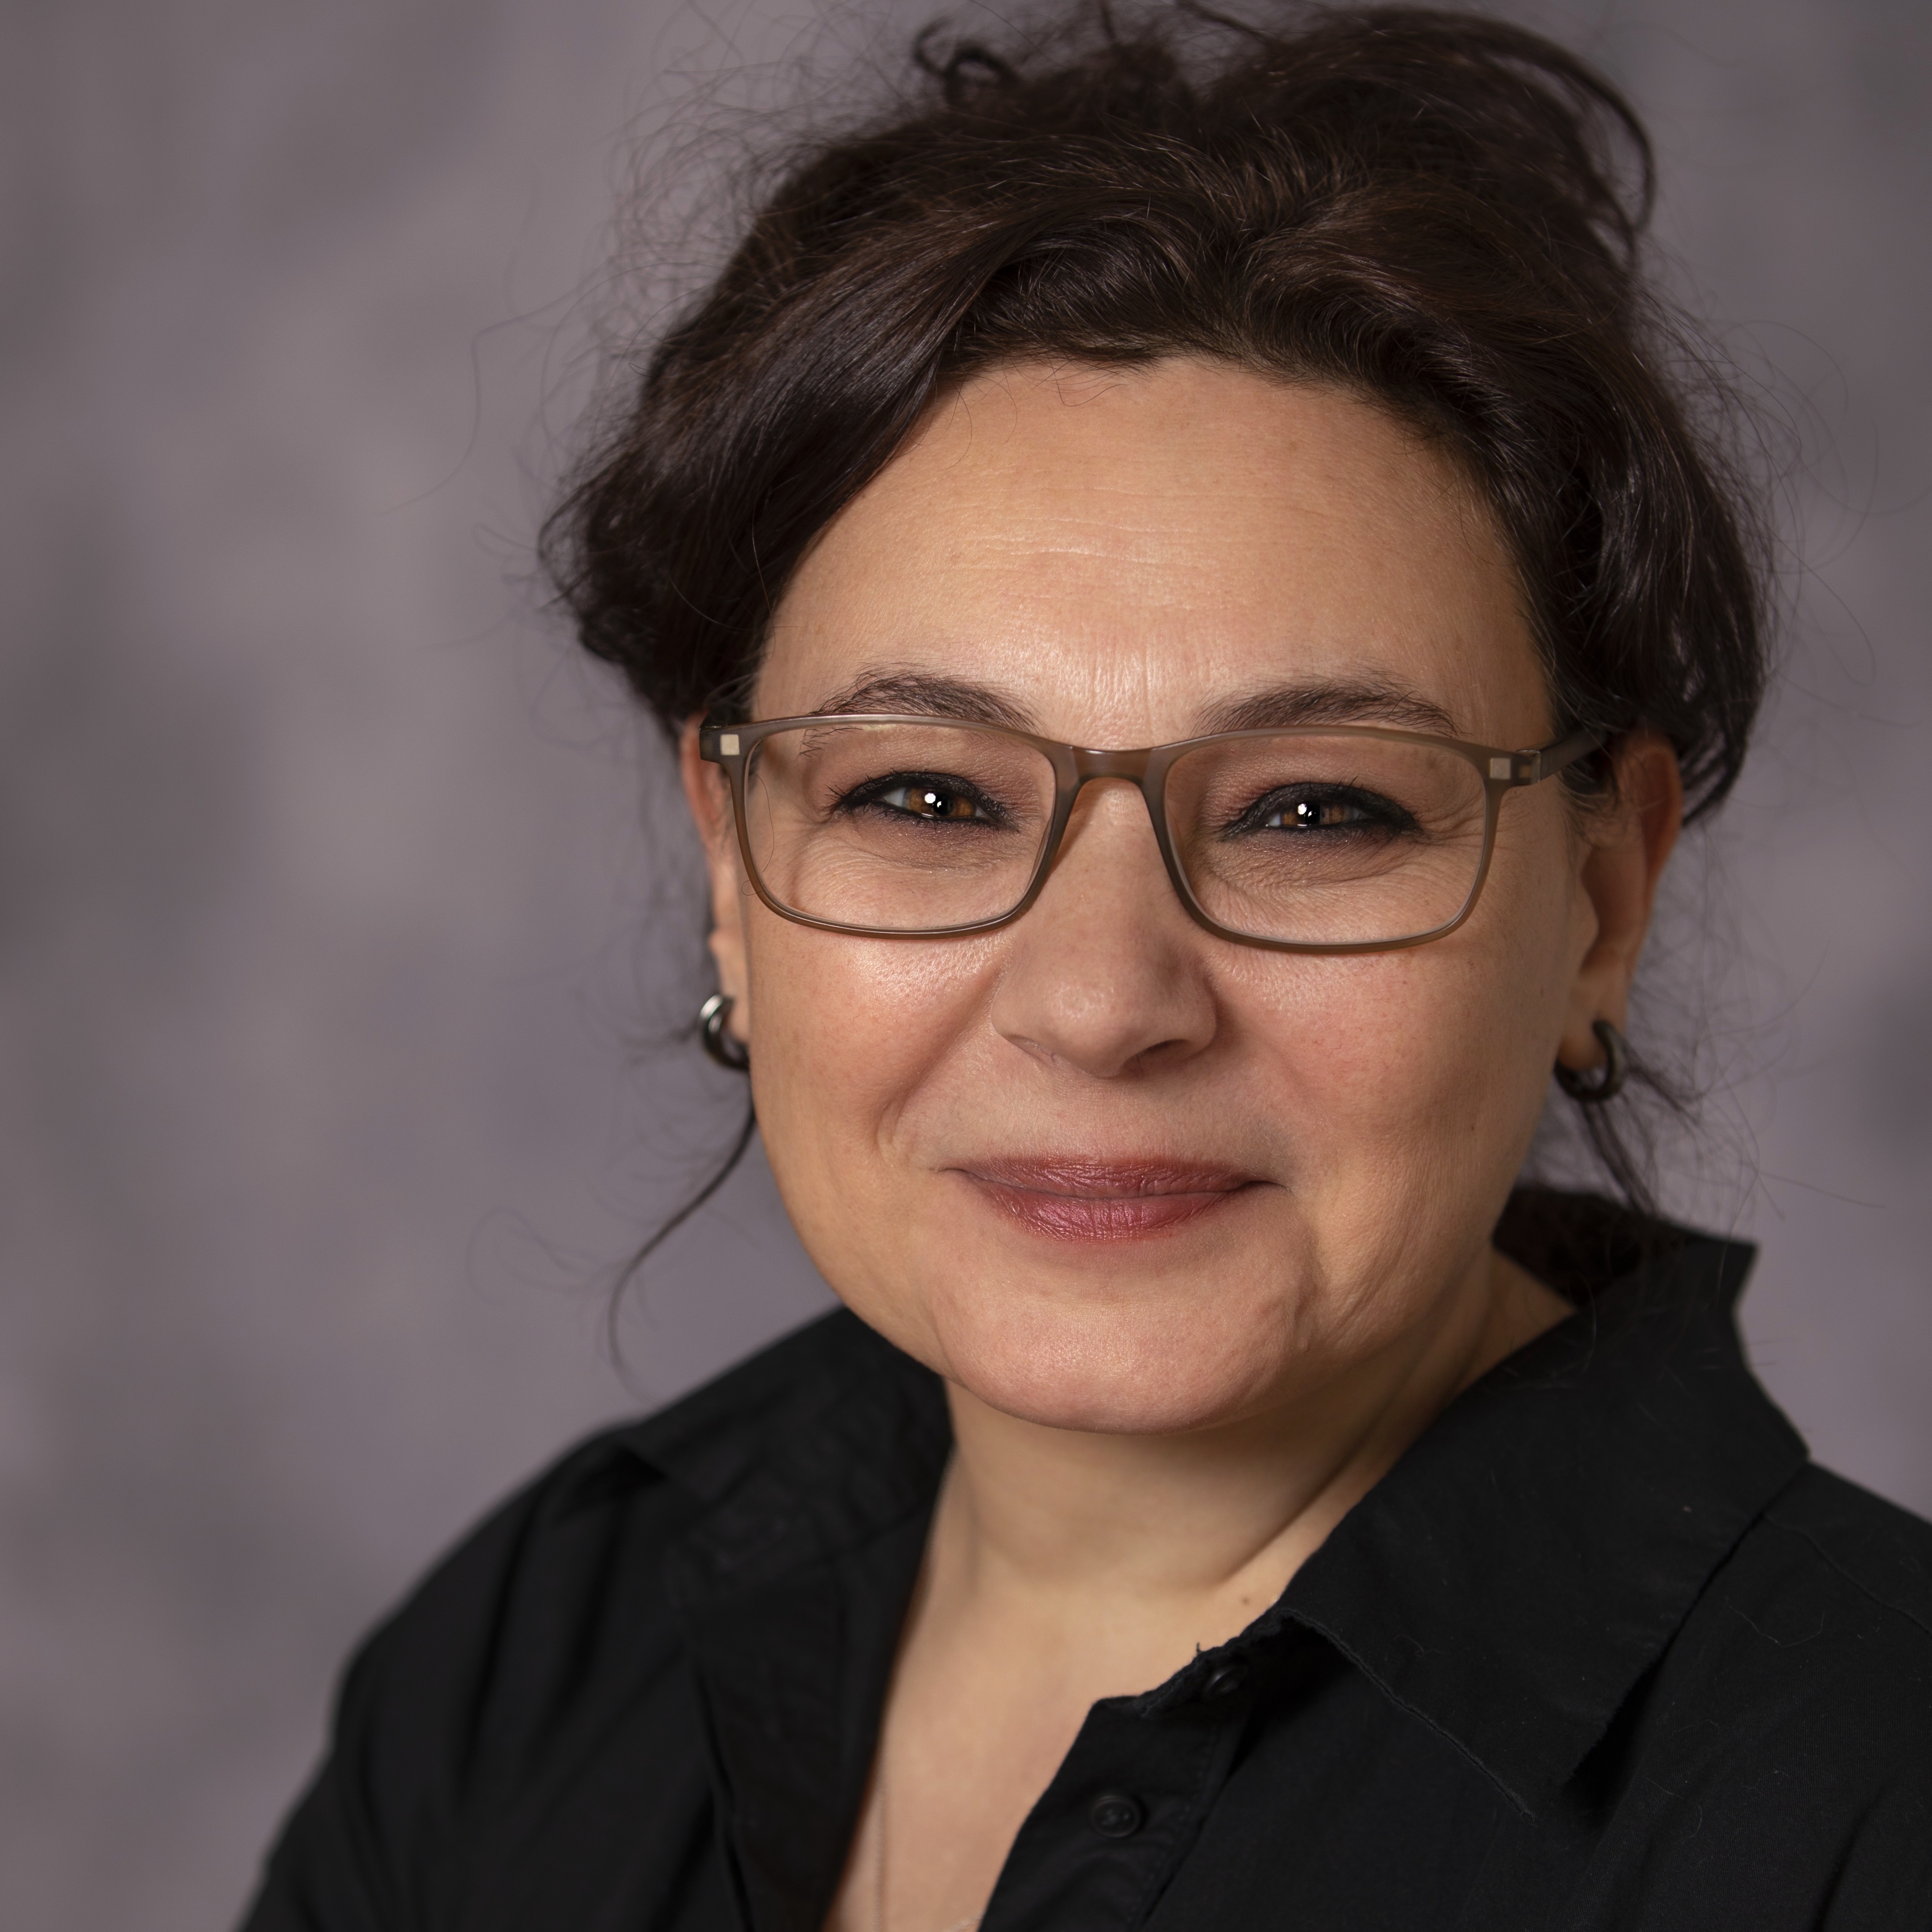 Head shot of Dr. Purnur Ozbirinci. She is wearing glasses and smiling at the camera. Her hair is in an up-do and she is wearing short earrings and a black blouse. 